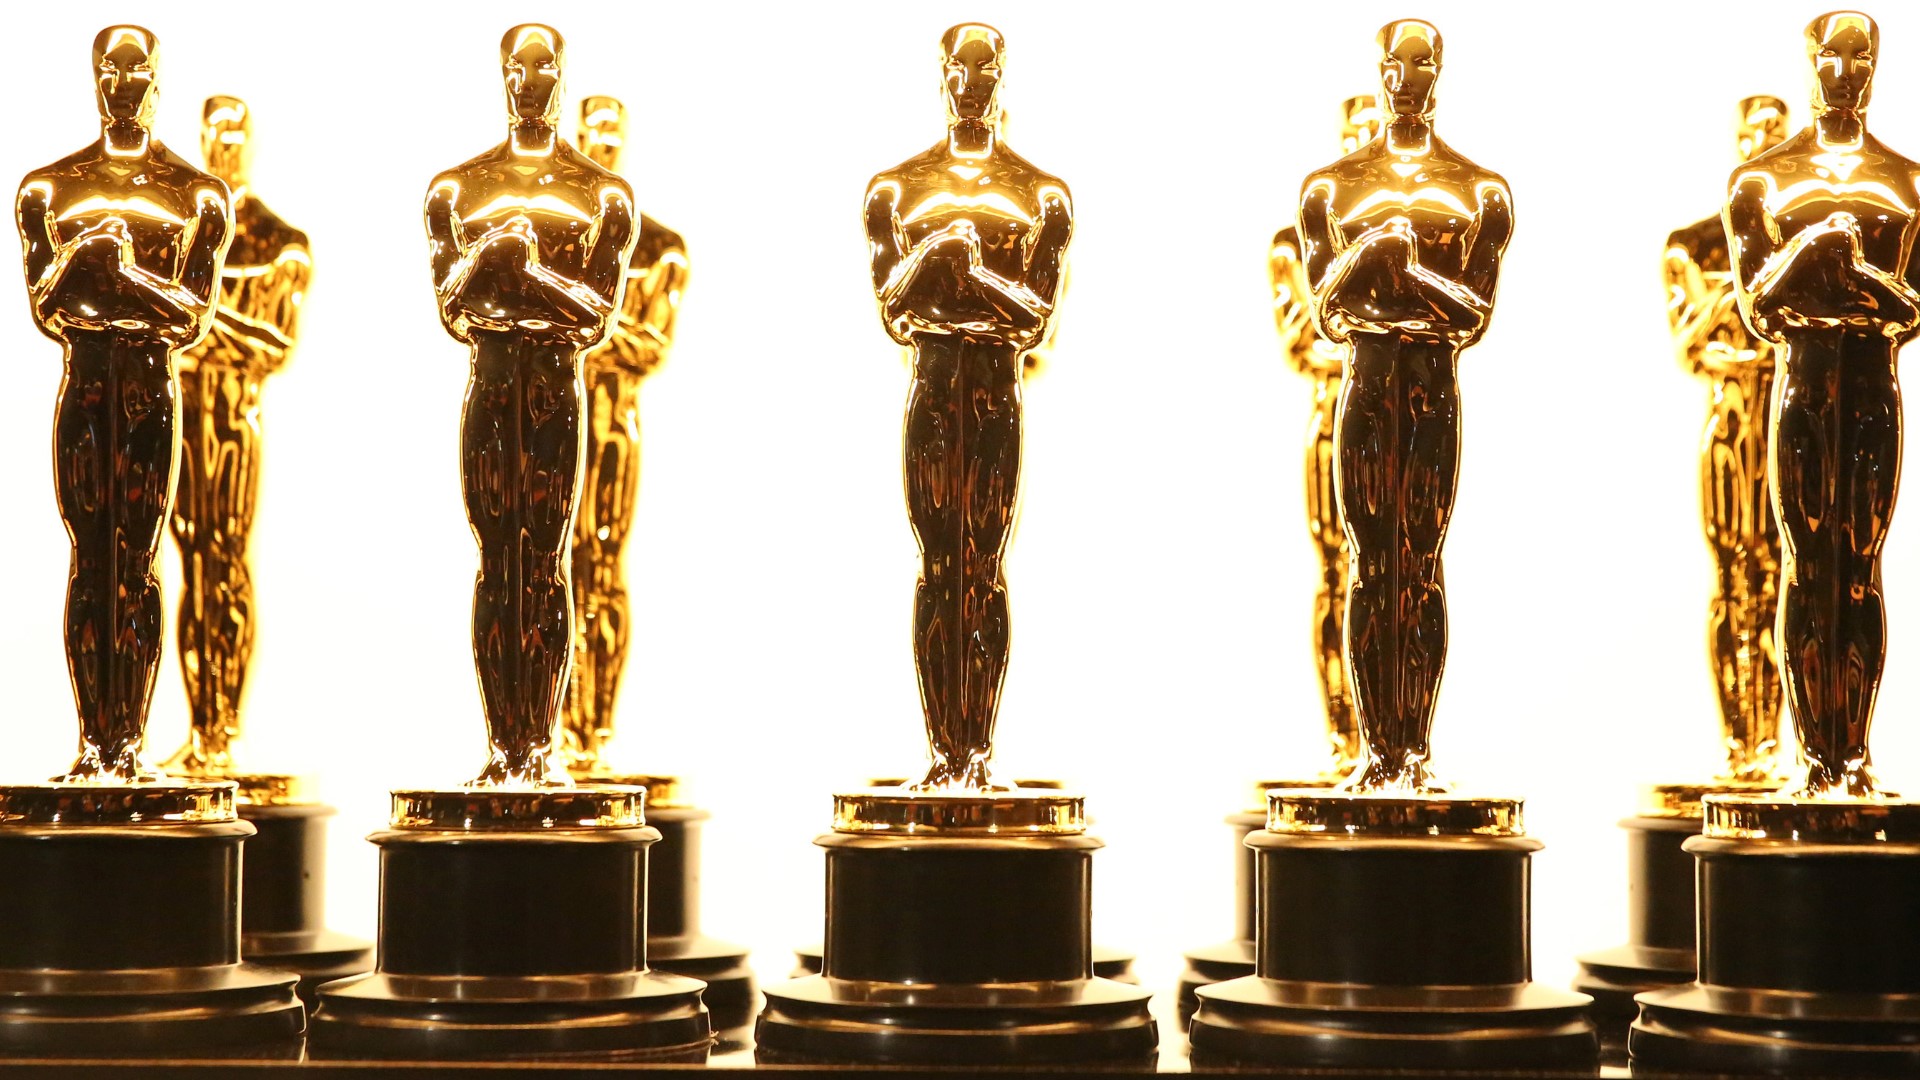 The Oscars will be broadcast live on ABC on Sunday, March 10 at 7 p.m. EST/6 p.m. CST.